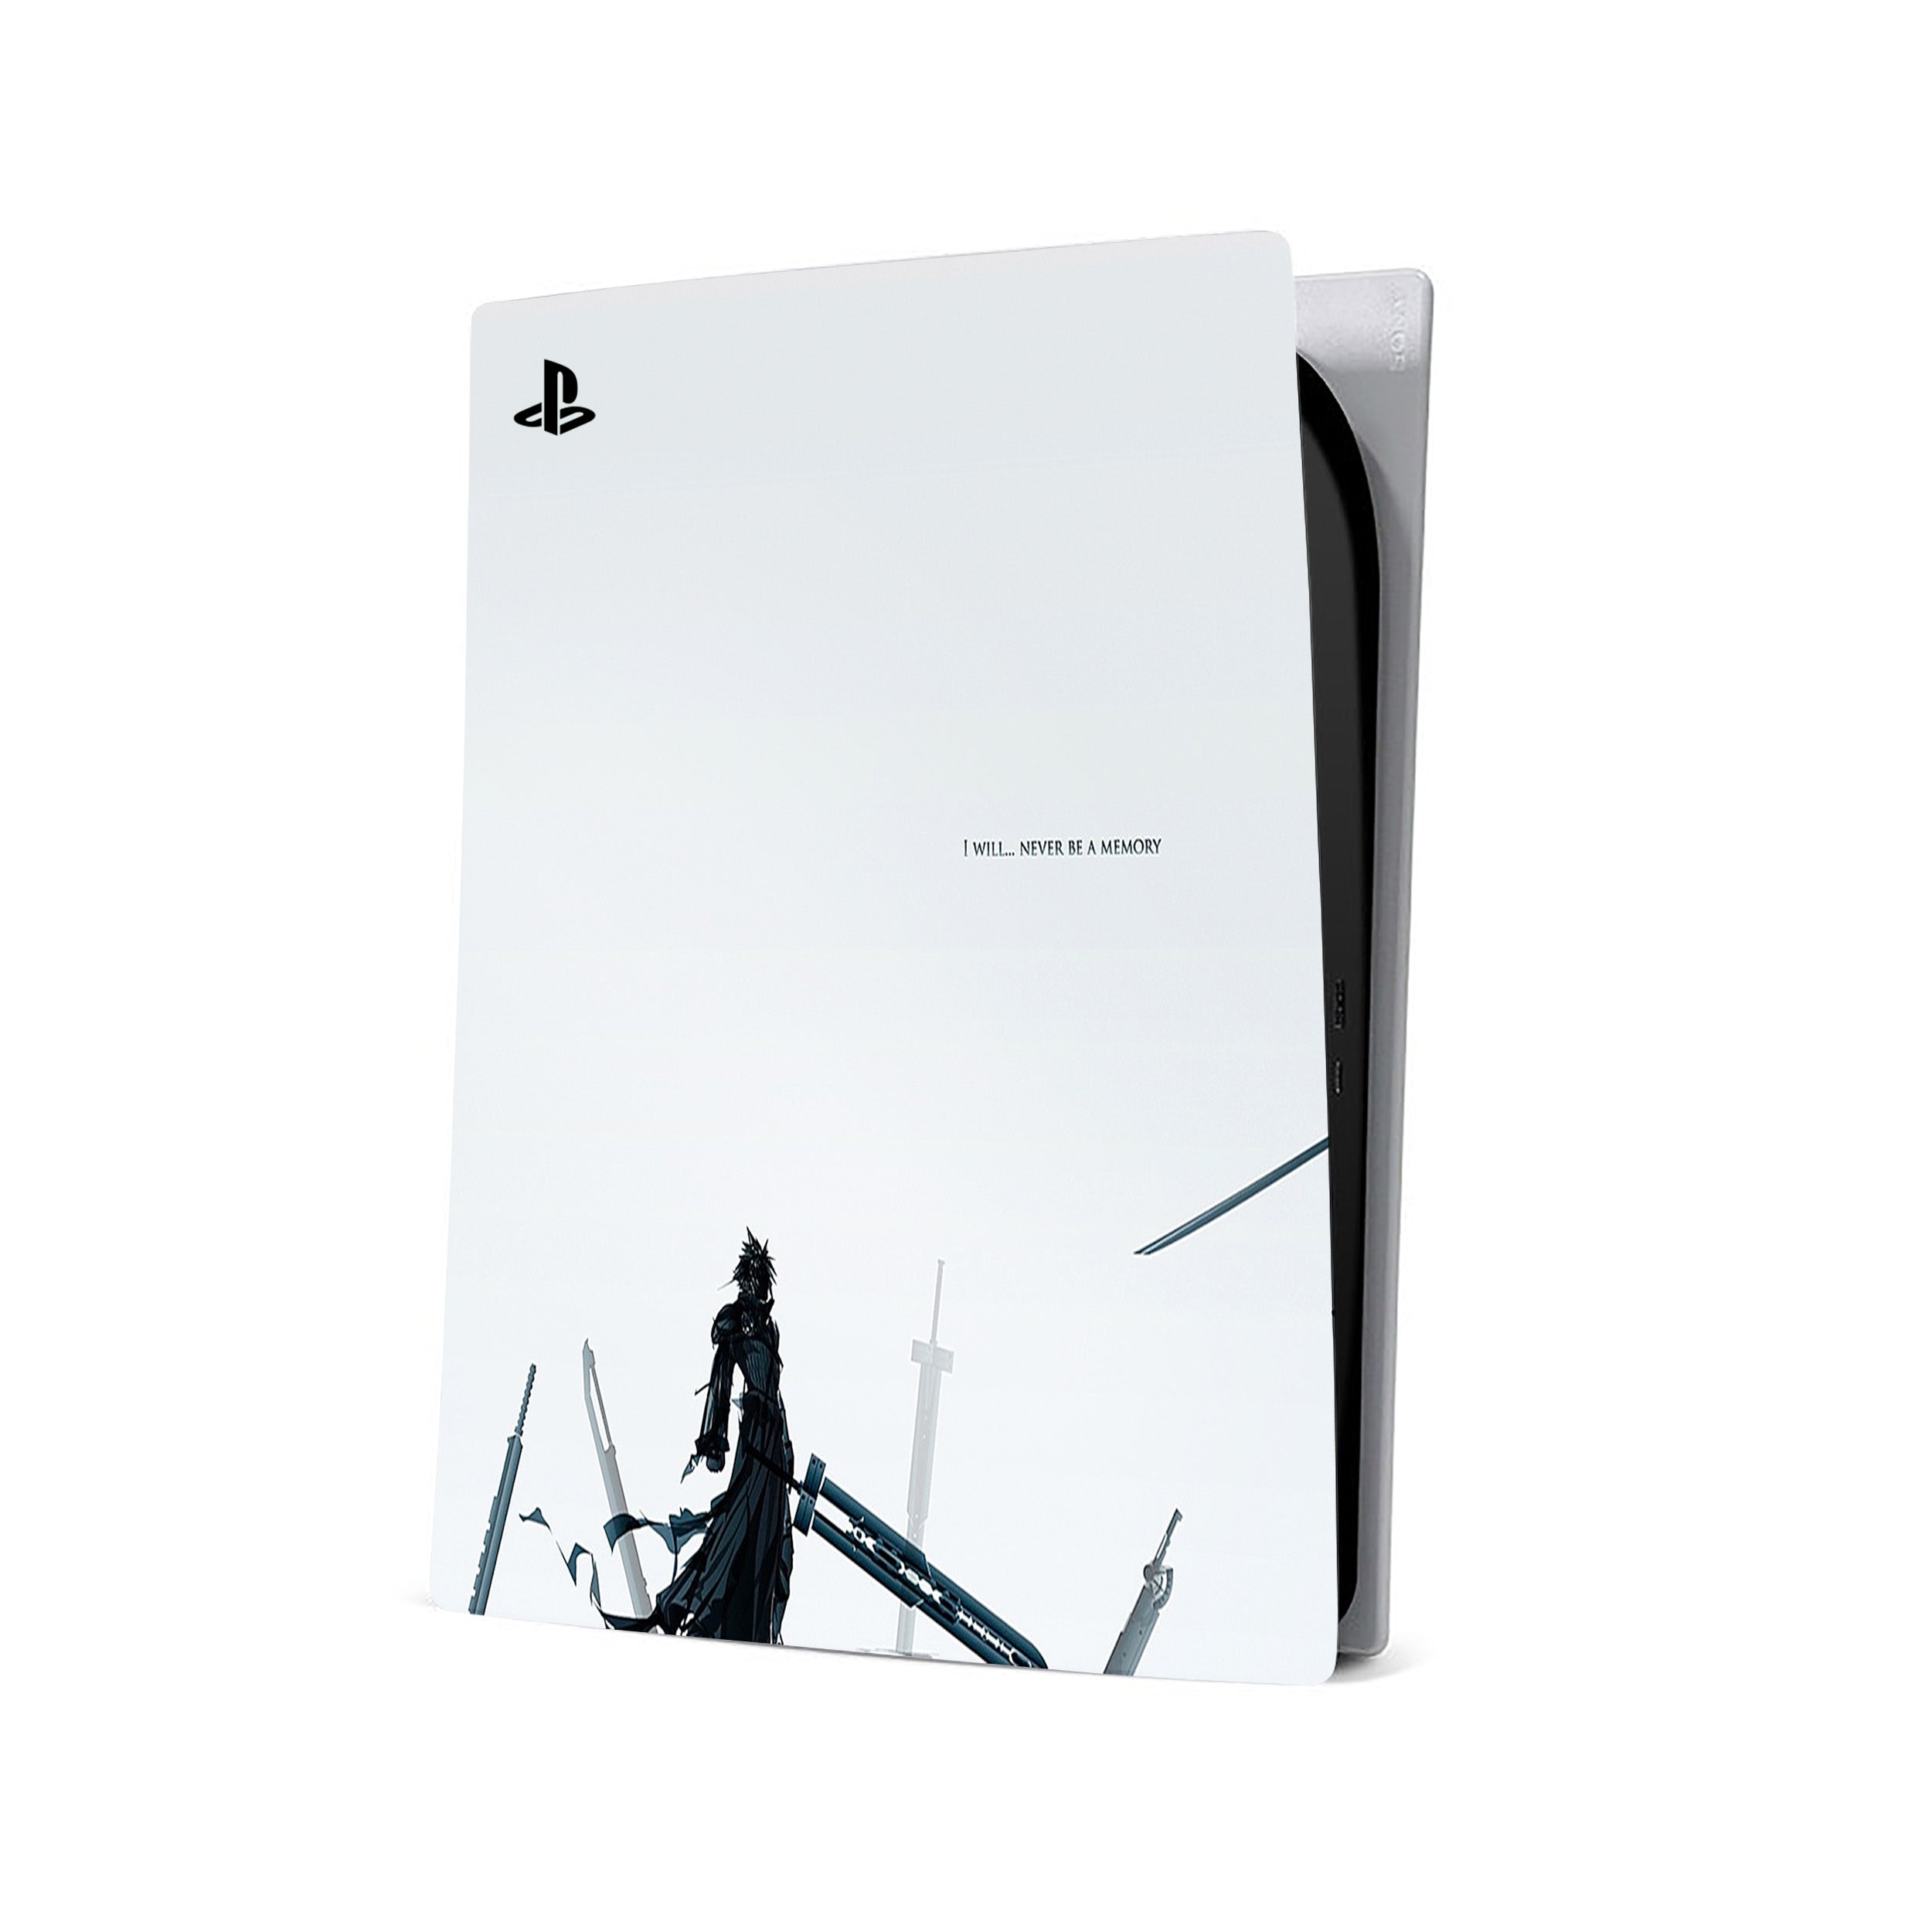 A video game skin featuring a Final Fantasy 7 Cloud design for the PS5.